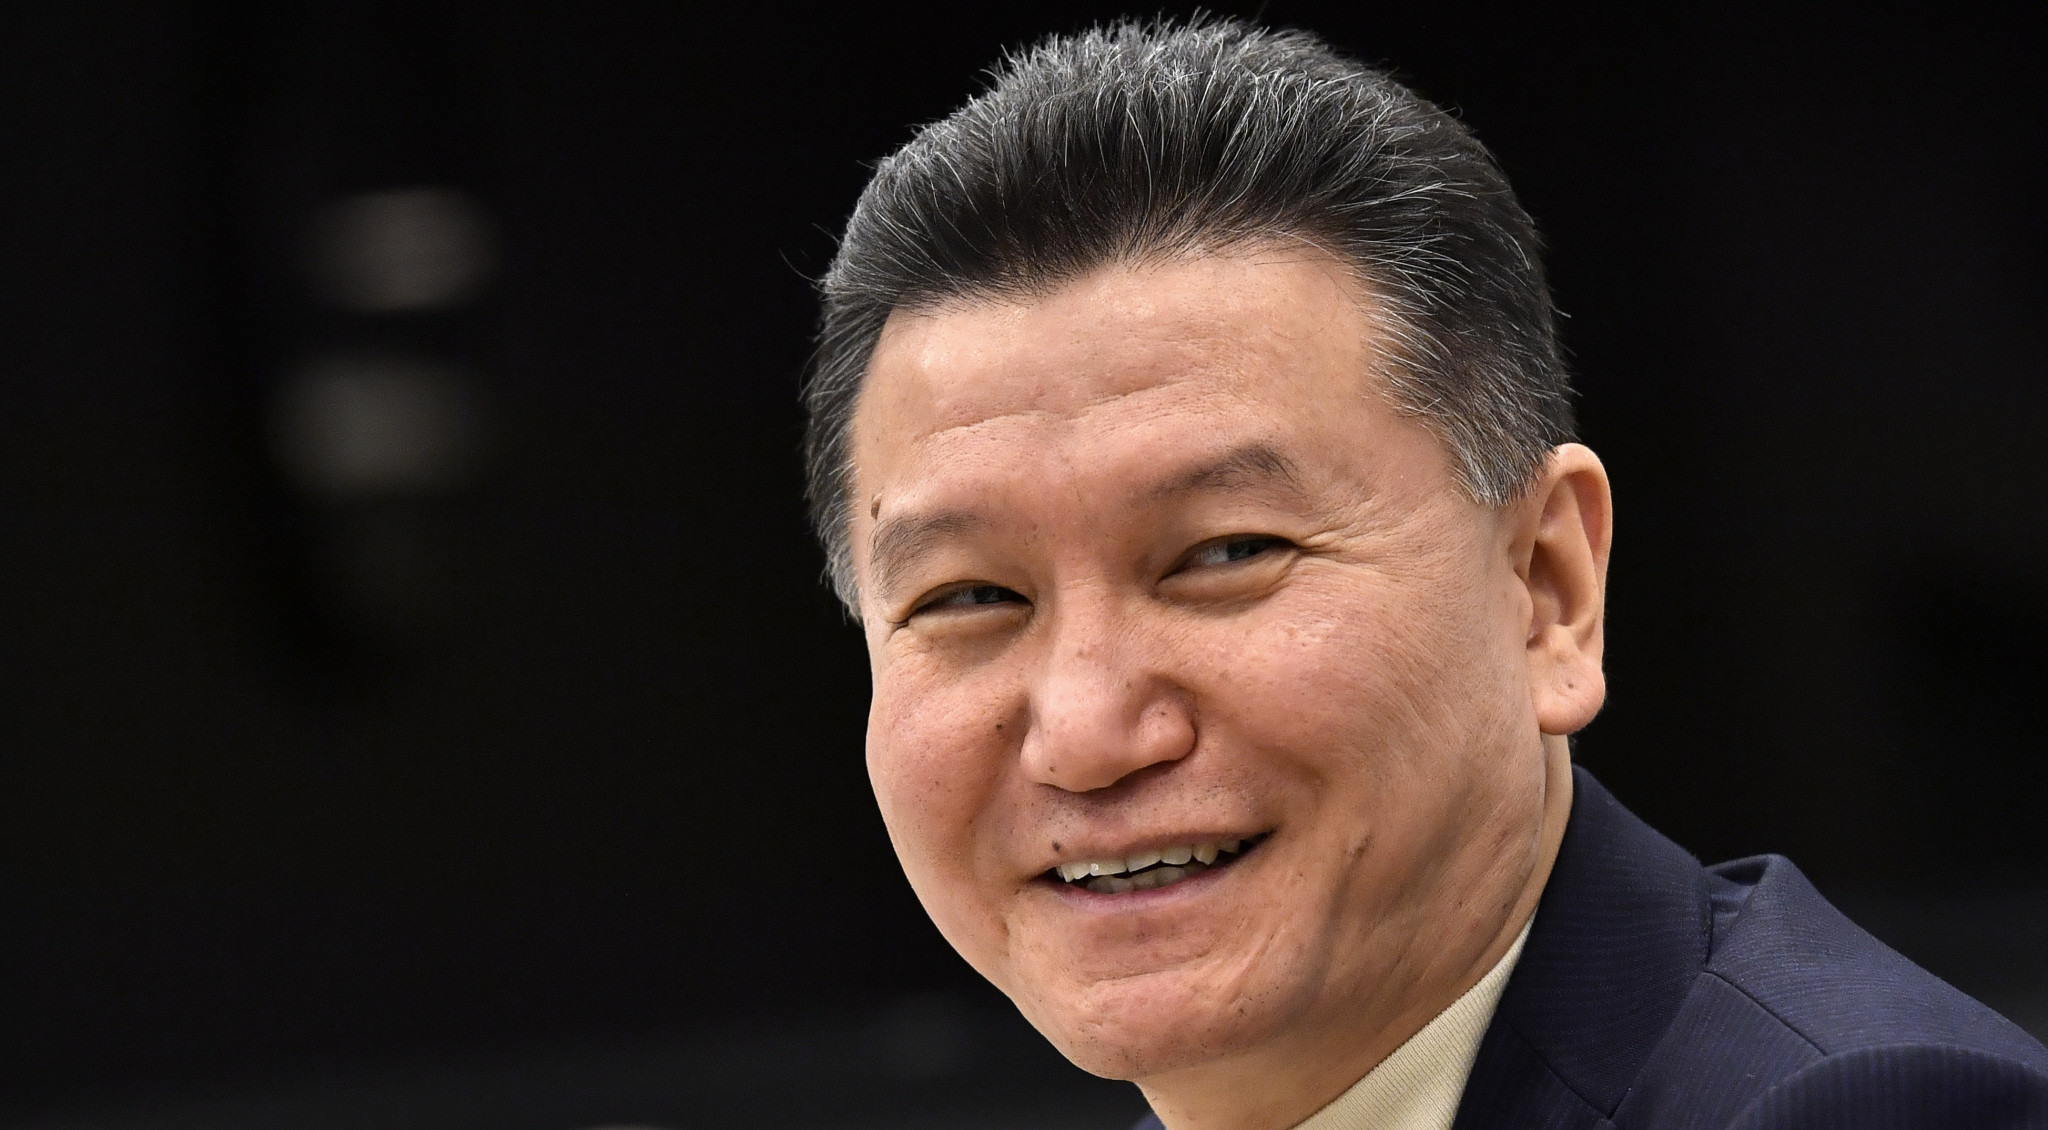 The Presidency of Kirsan Ilyumzhinov will be discussed in Antalya ©Getty Images